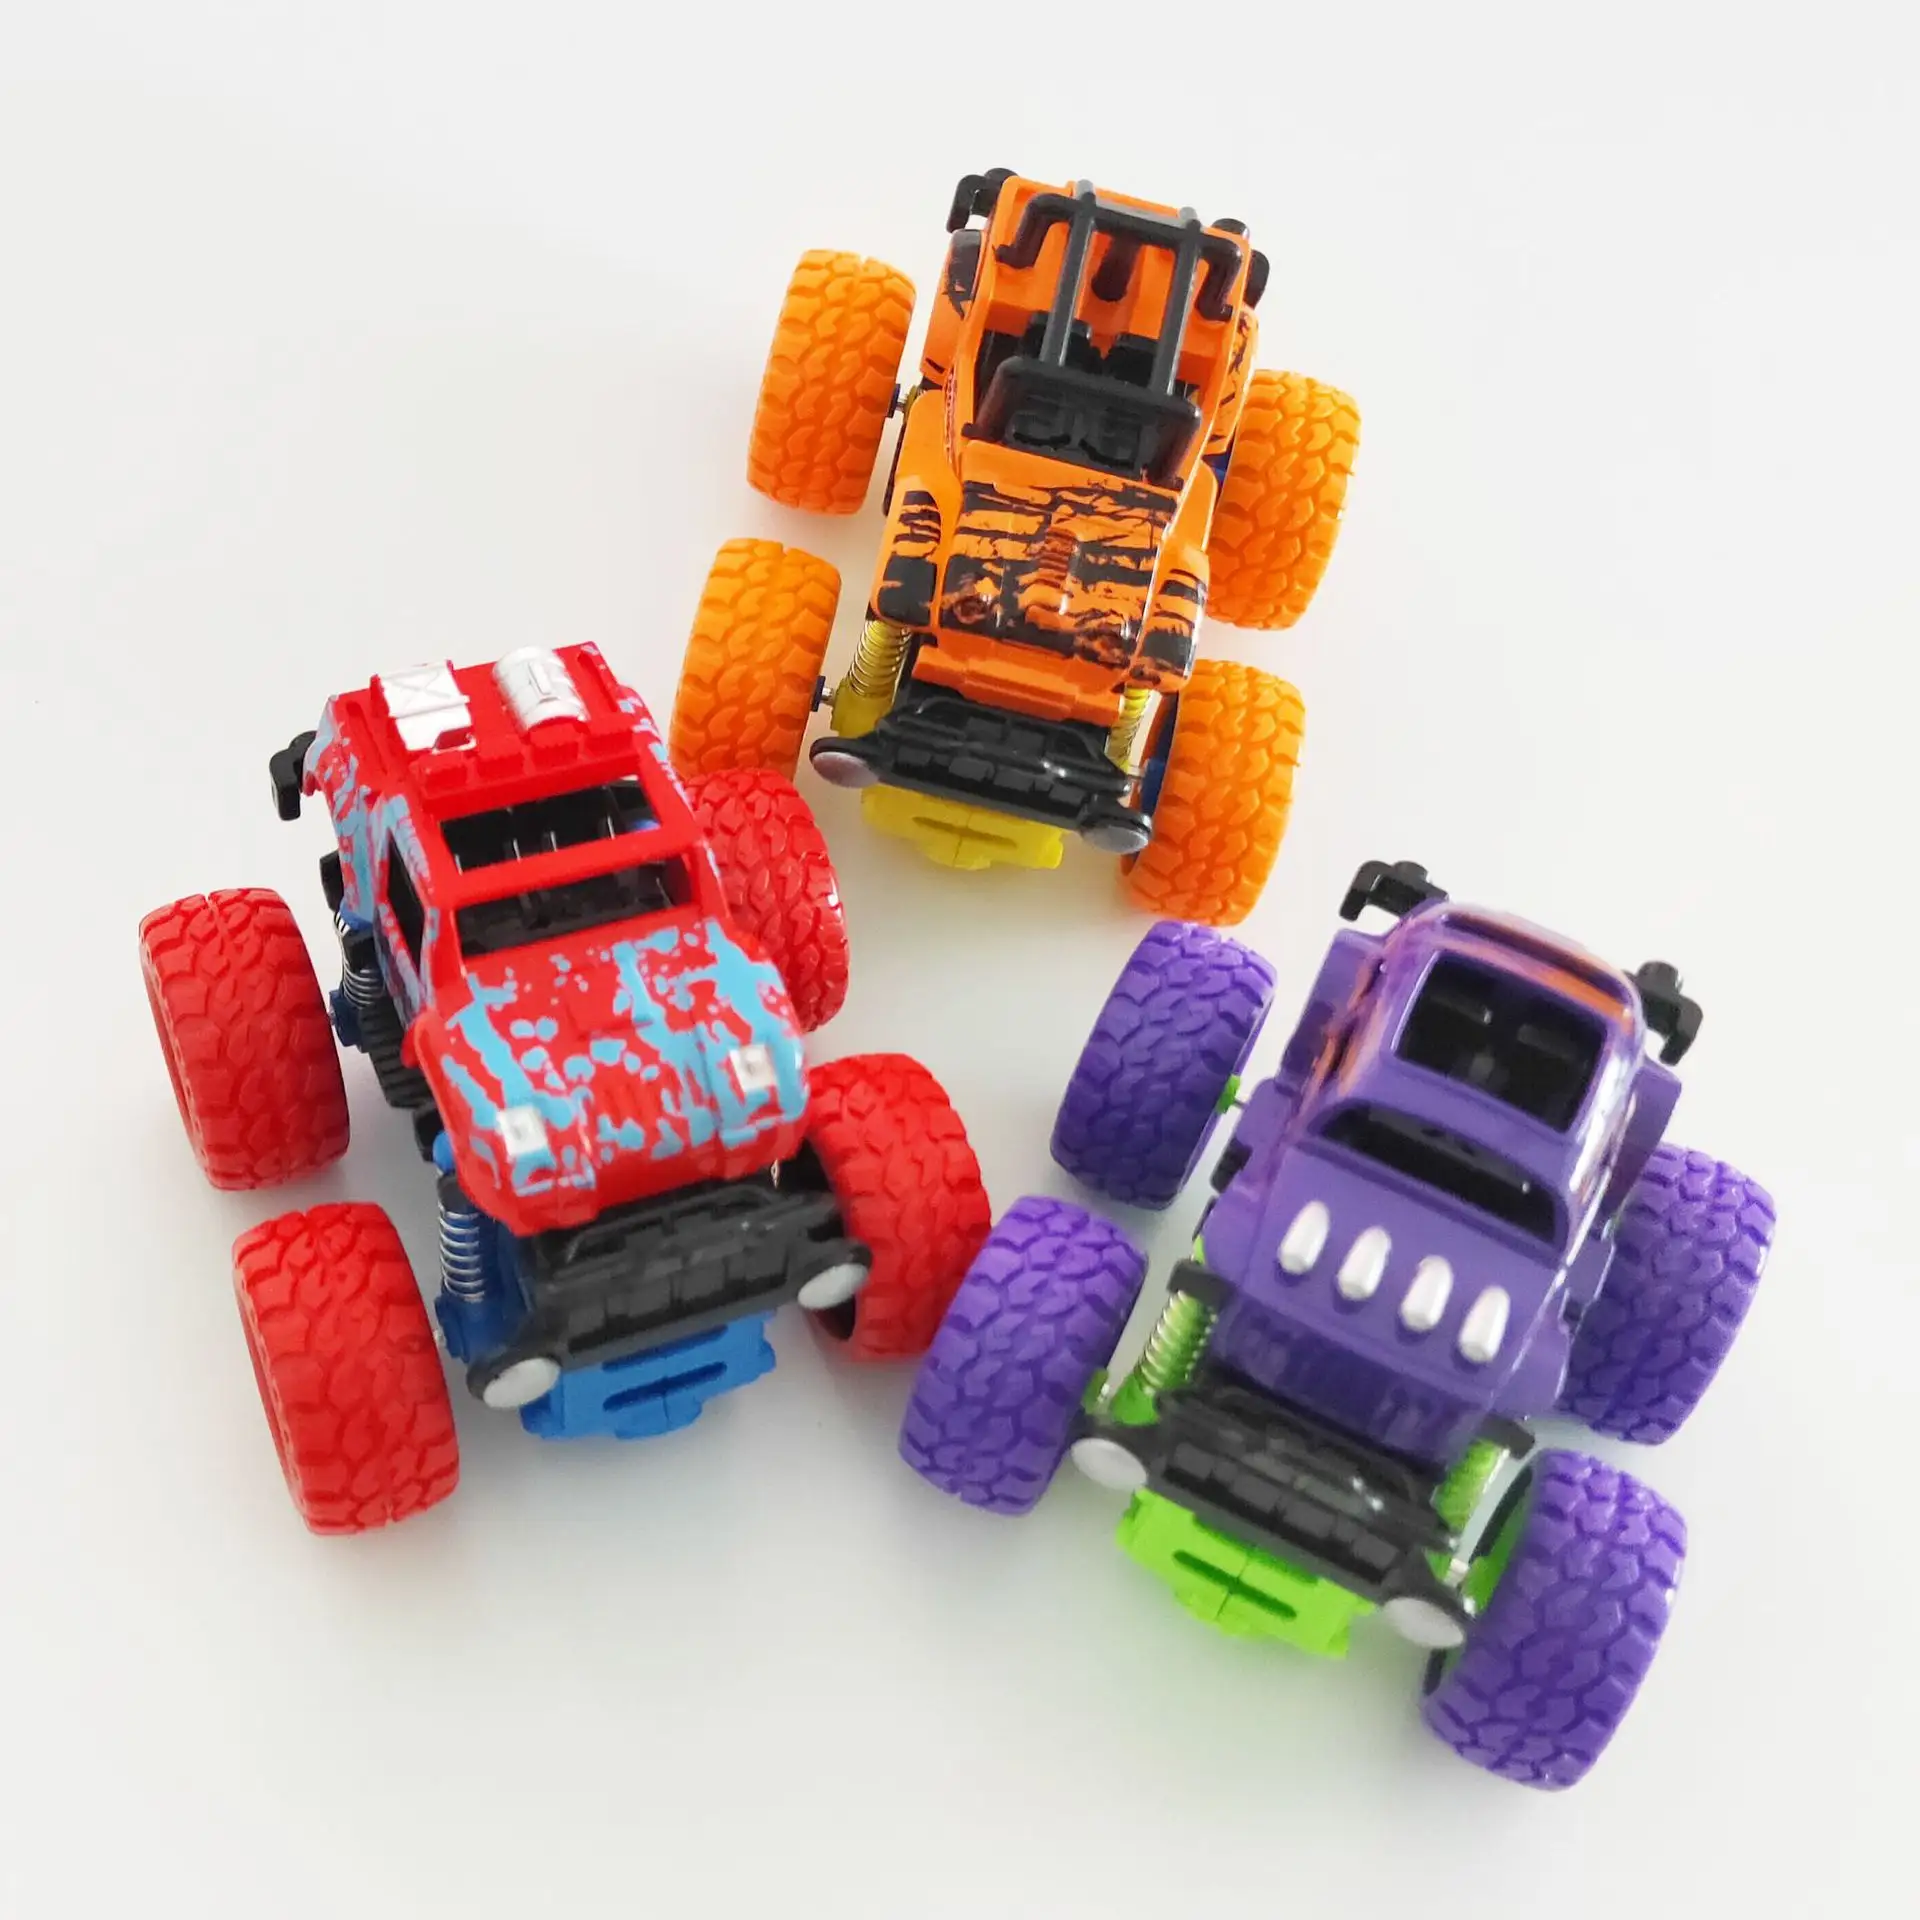 best quality educational toys learning child friction powered cars frMaternal ee wheel truck toy for kids cartoon toy